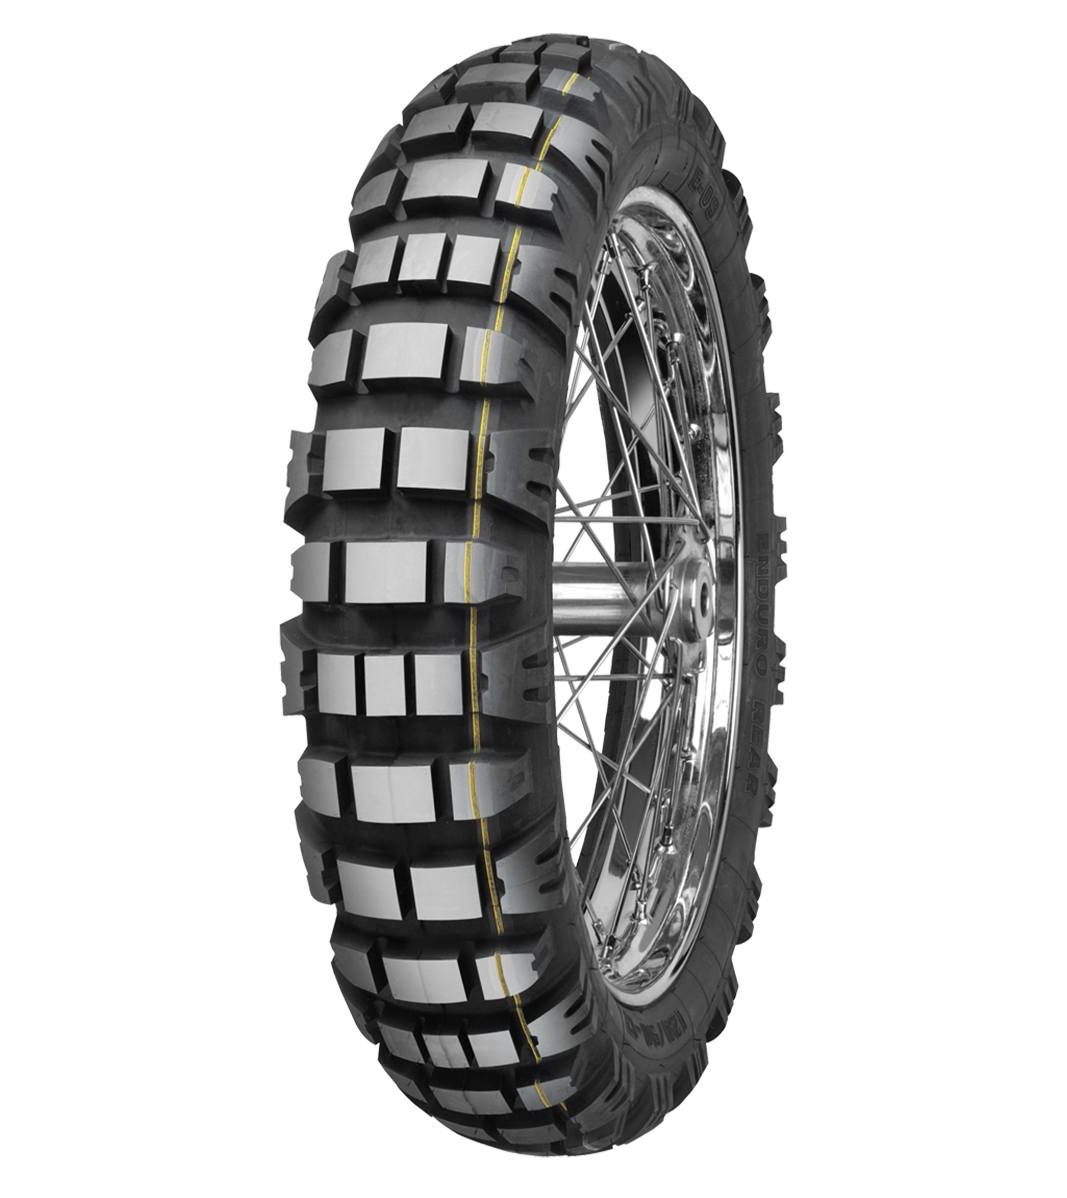 Mitas E-09 ENDURO 150/70-18 Trail OFF Trail DAKAR 70R Yellow Tubeless Rear Tire, 224172, 150/70-18, Adventure Touring, E Series, E-09 Enduro, Rear, Trail, Trail OFF, Tires - Imported and distributed in North & South America by Lindeco Genuine Powersports - Premier Powersports Equipment and Accessories for Motorcycle Enthusiasts, Professional Riders and Dealers.